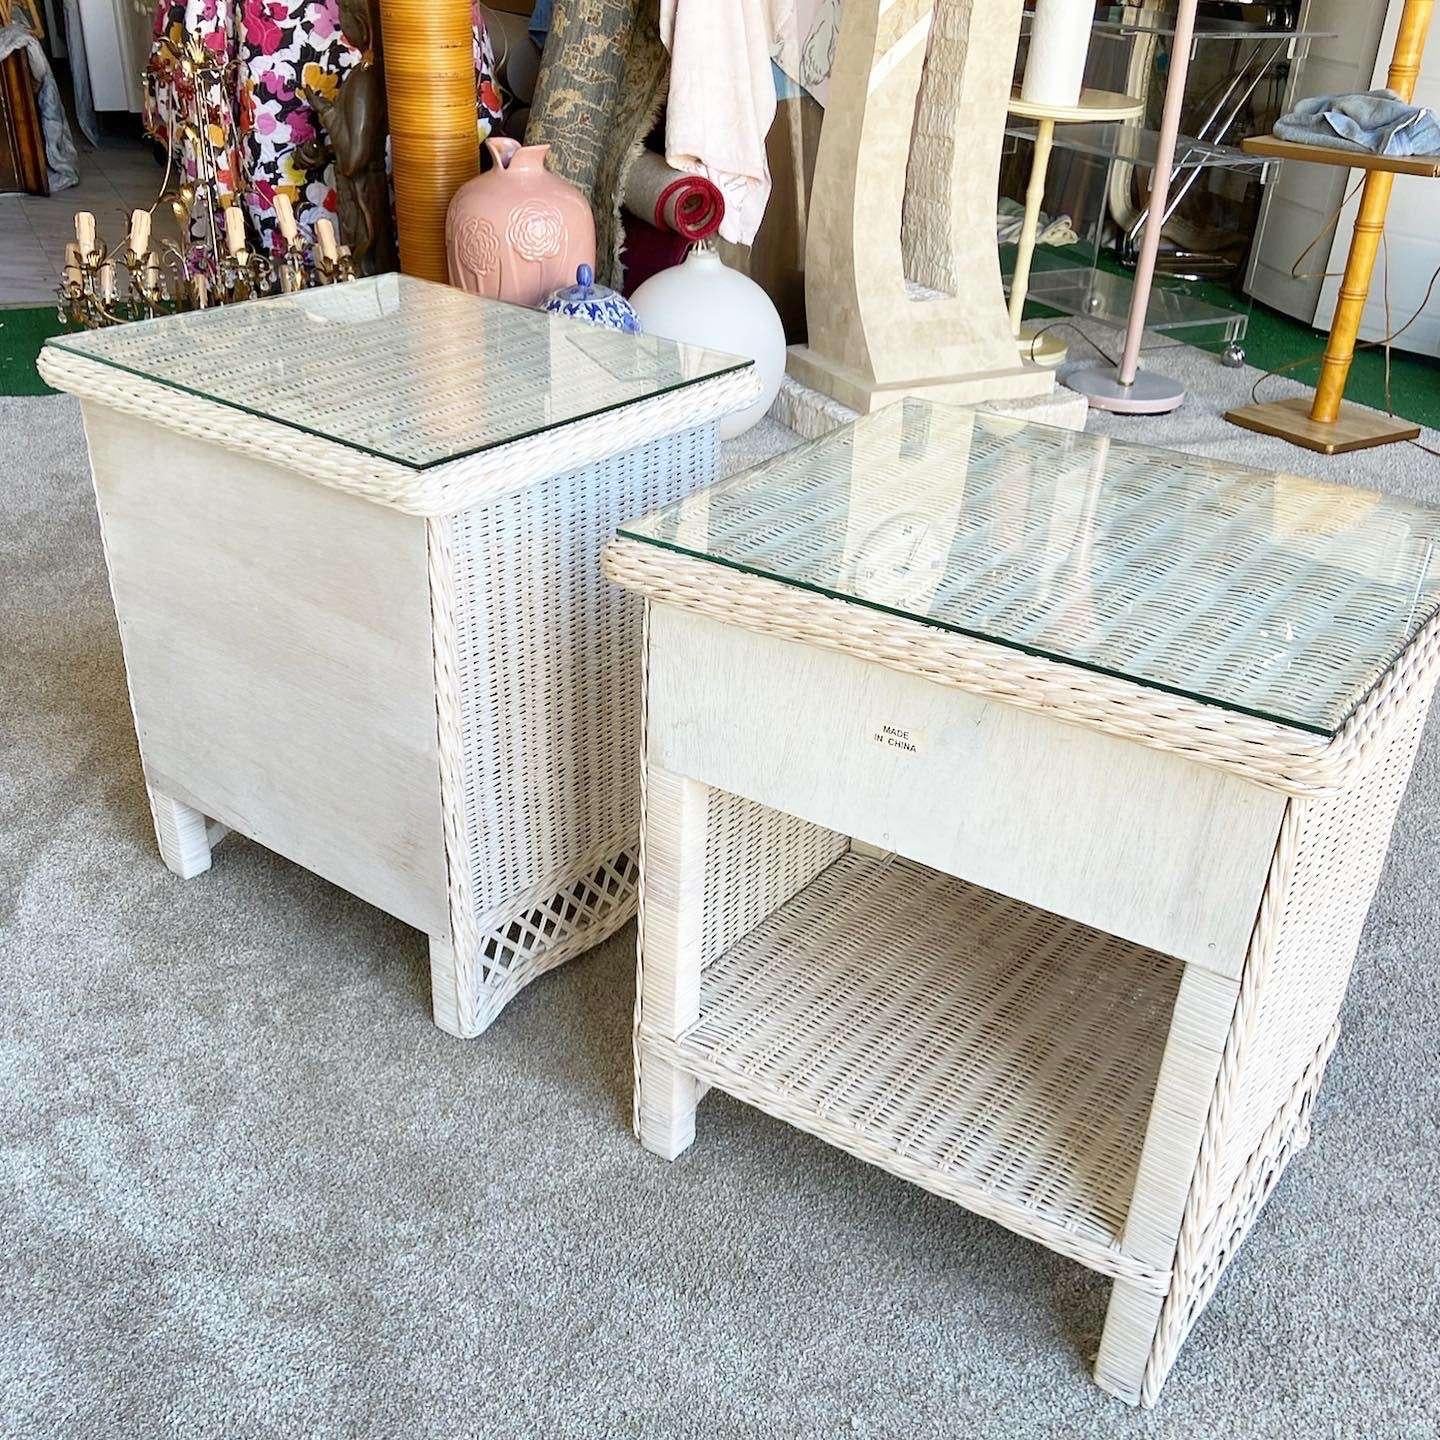 1990s Boho Chic White Wicker Glass Top Nightstands - Set of 2 For Sale 2